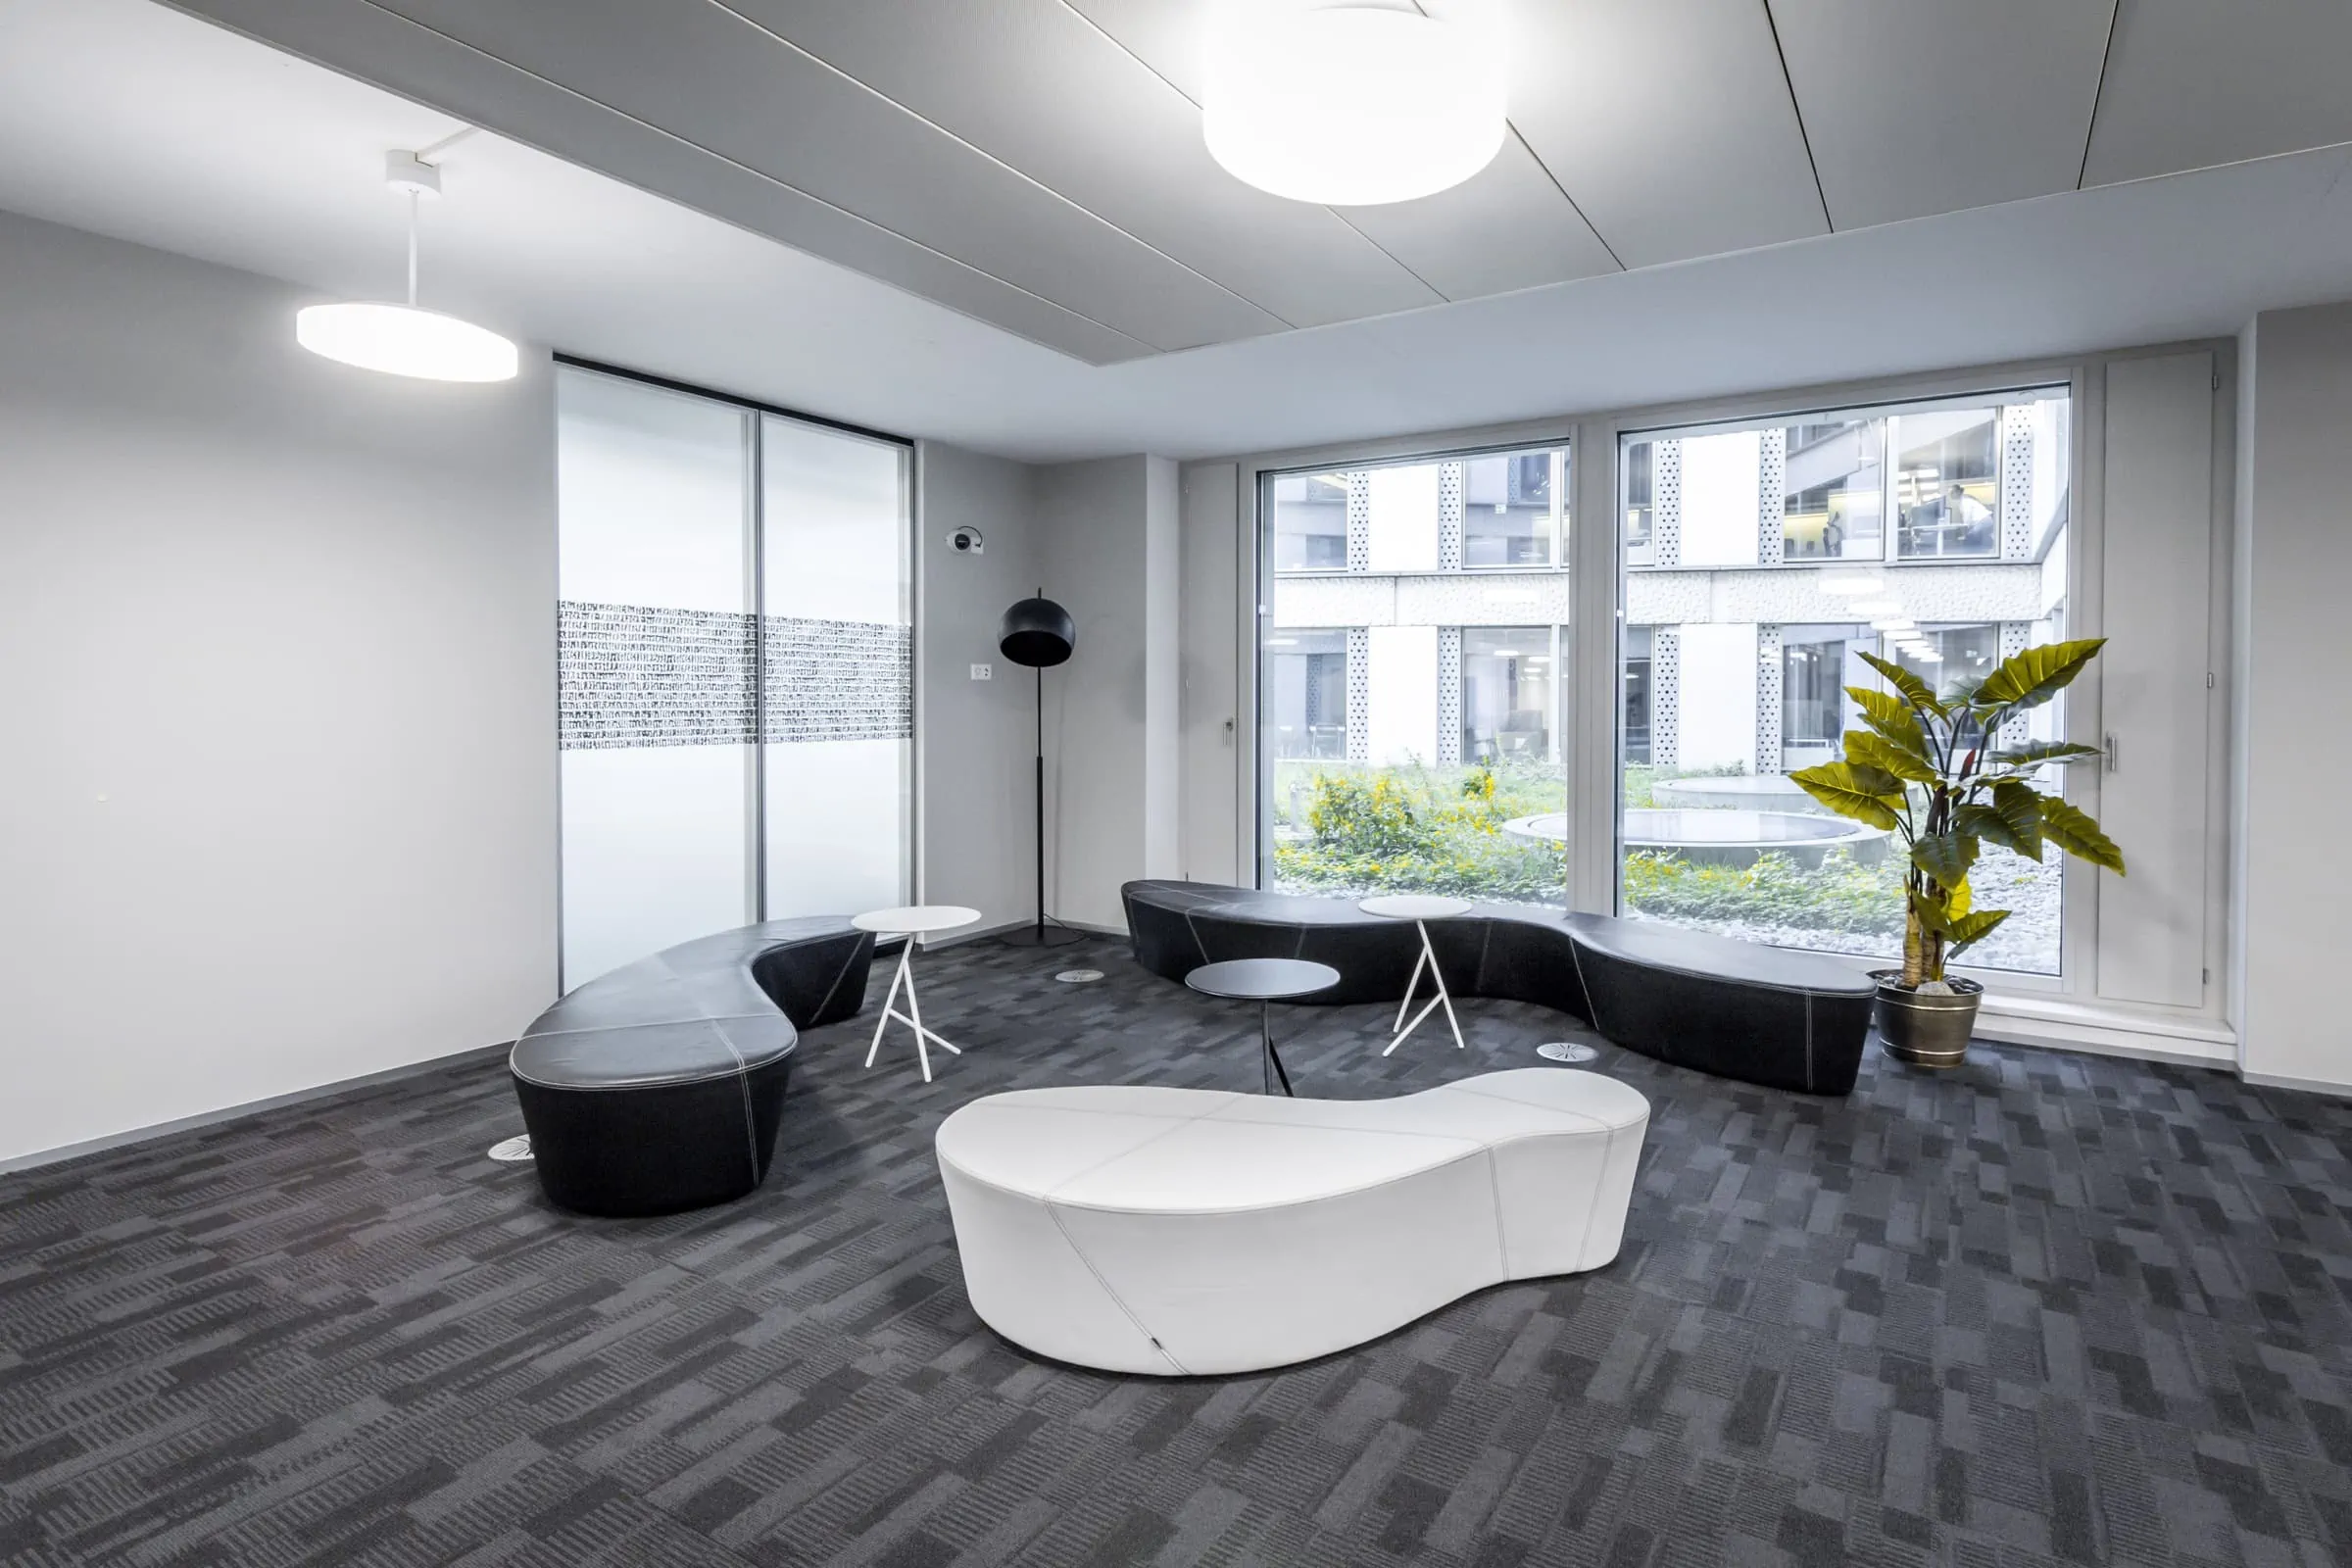 Lounge area with seating at OBC Suisse Europaallee